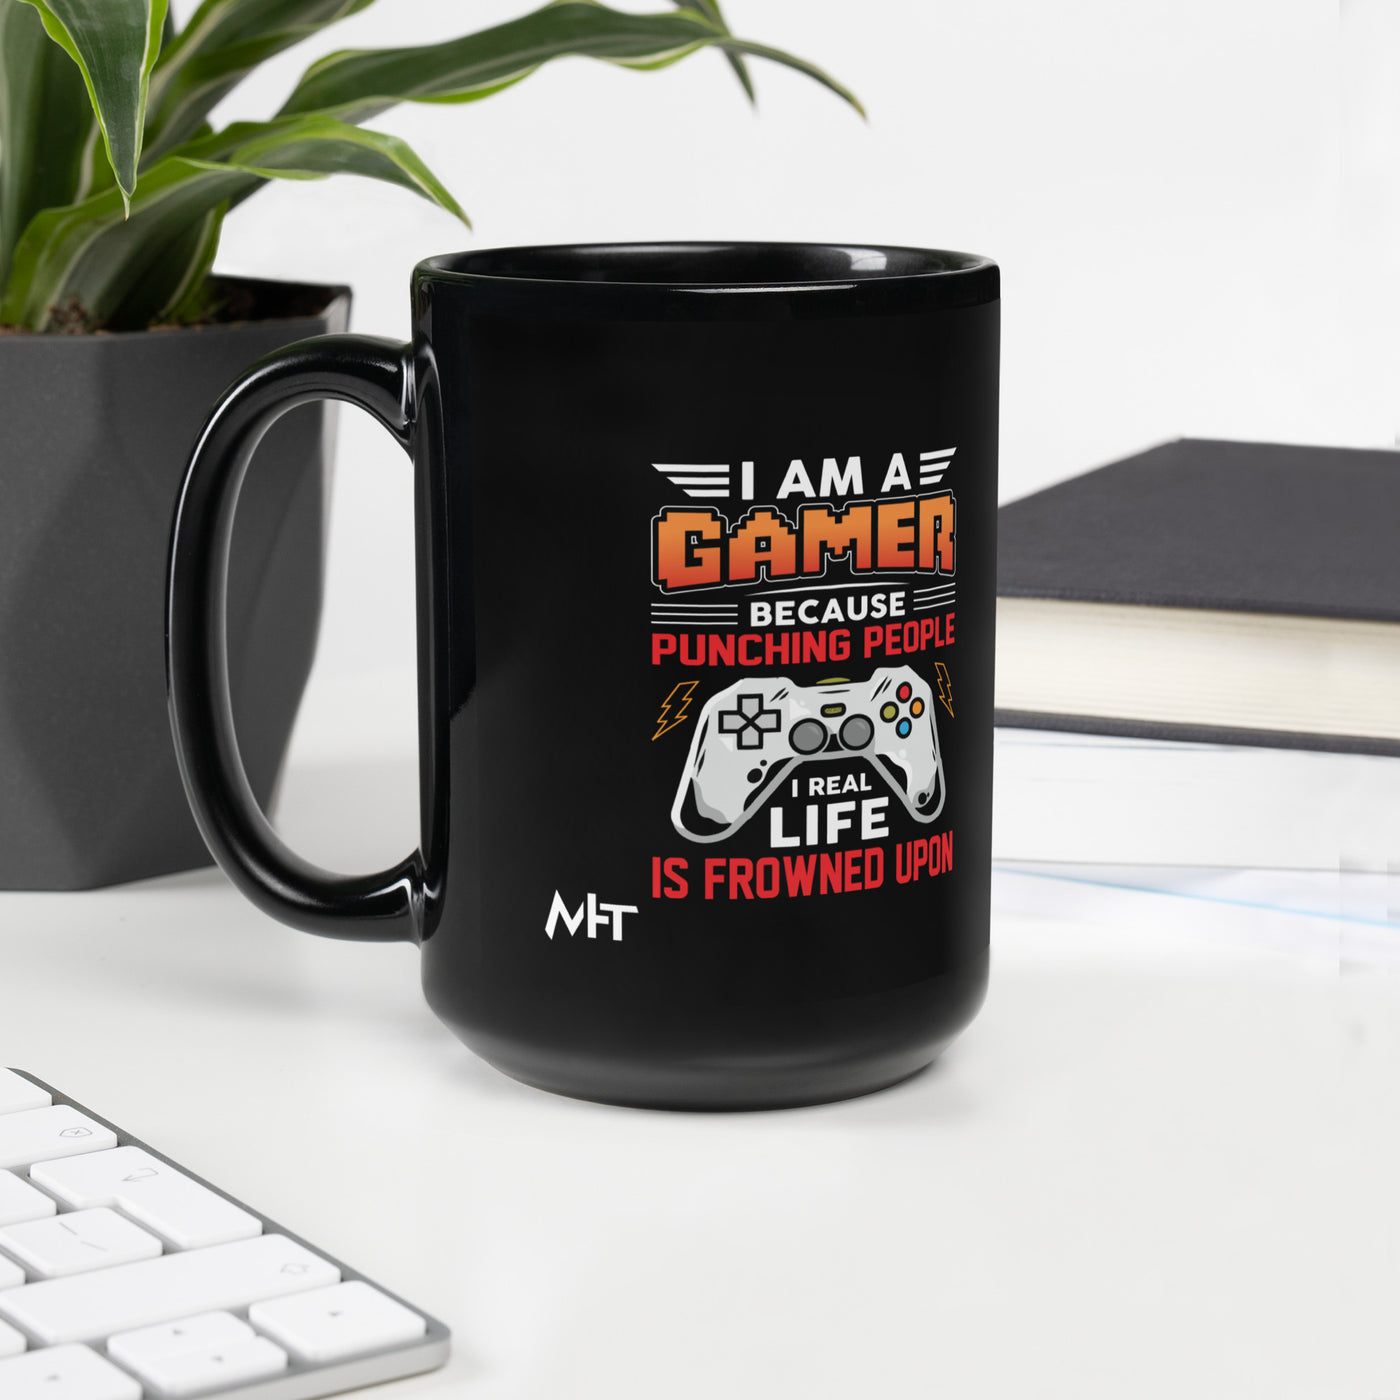 I am a Gamer because Punching people in real life is frowned upon - Black Glossy Mug